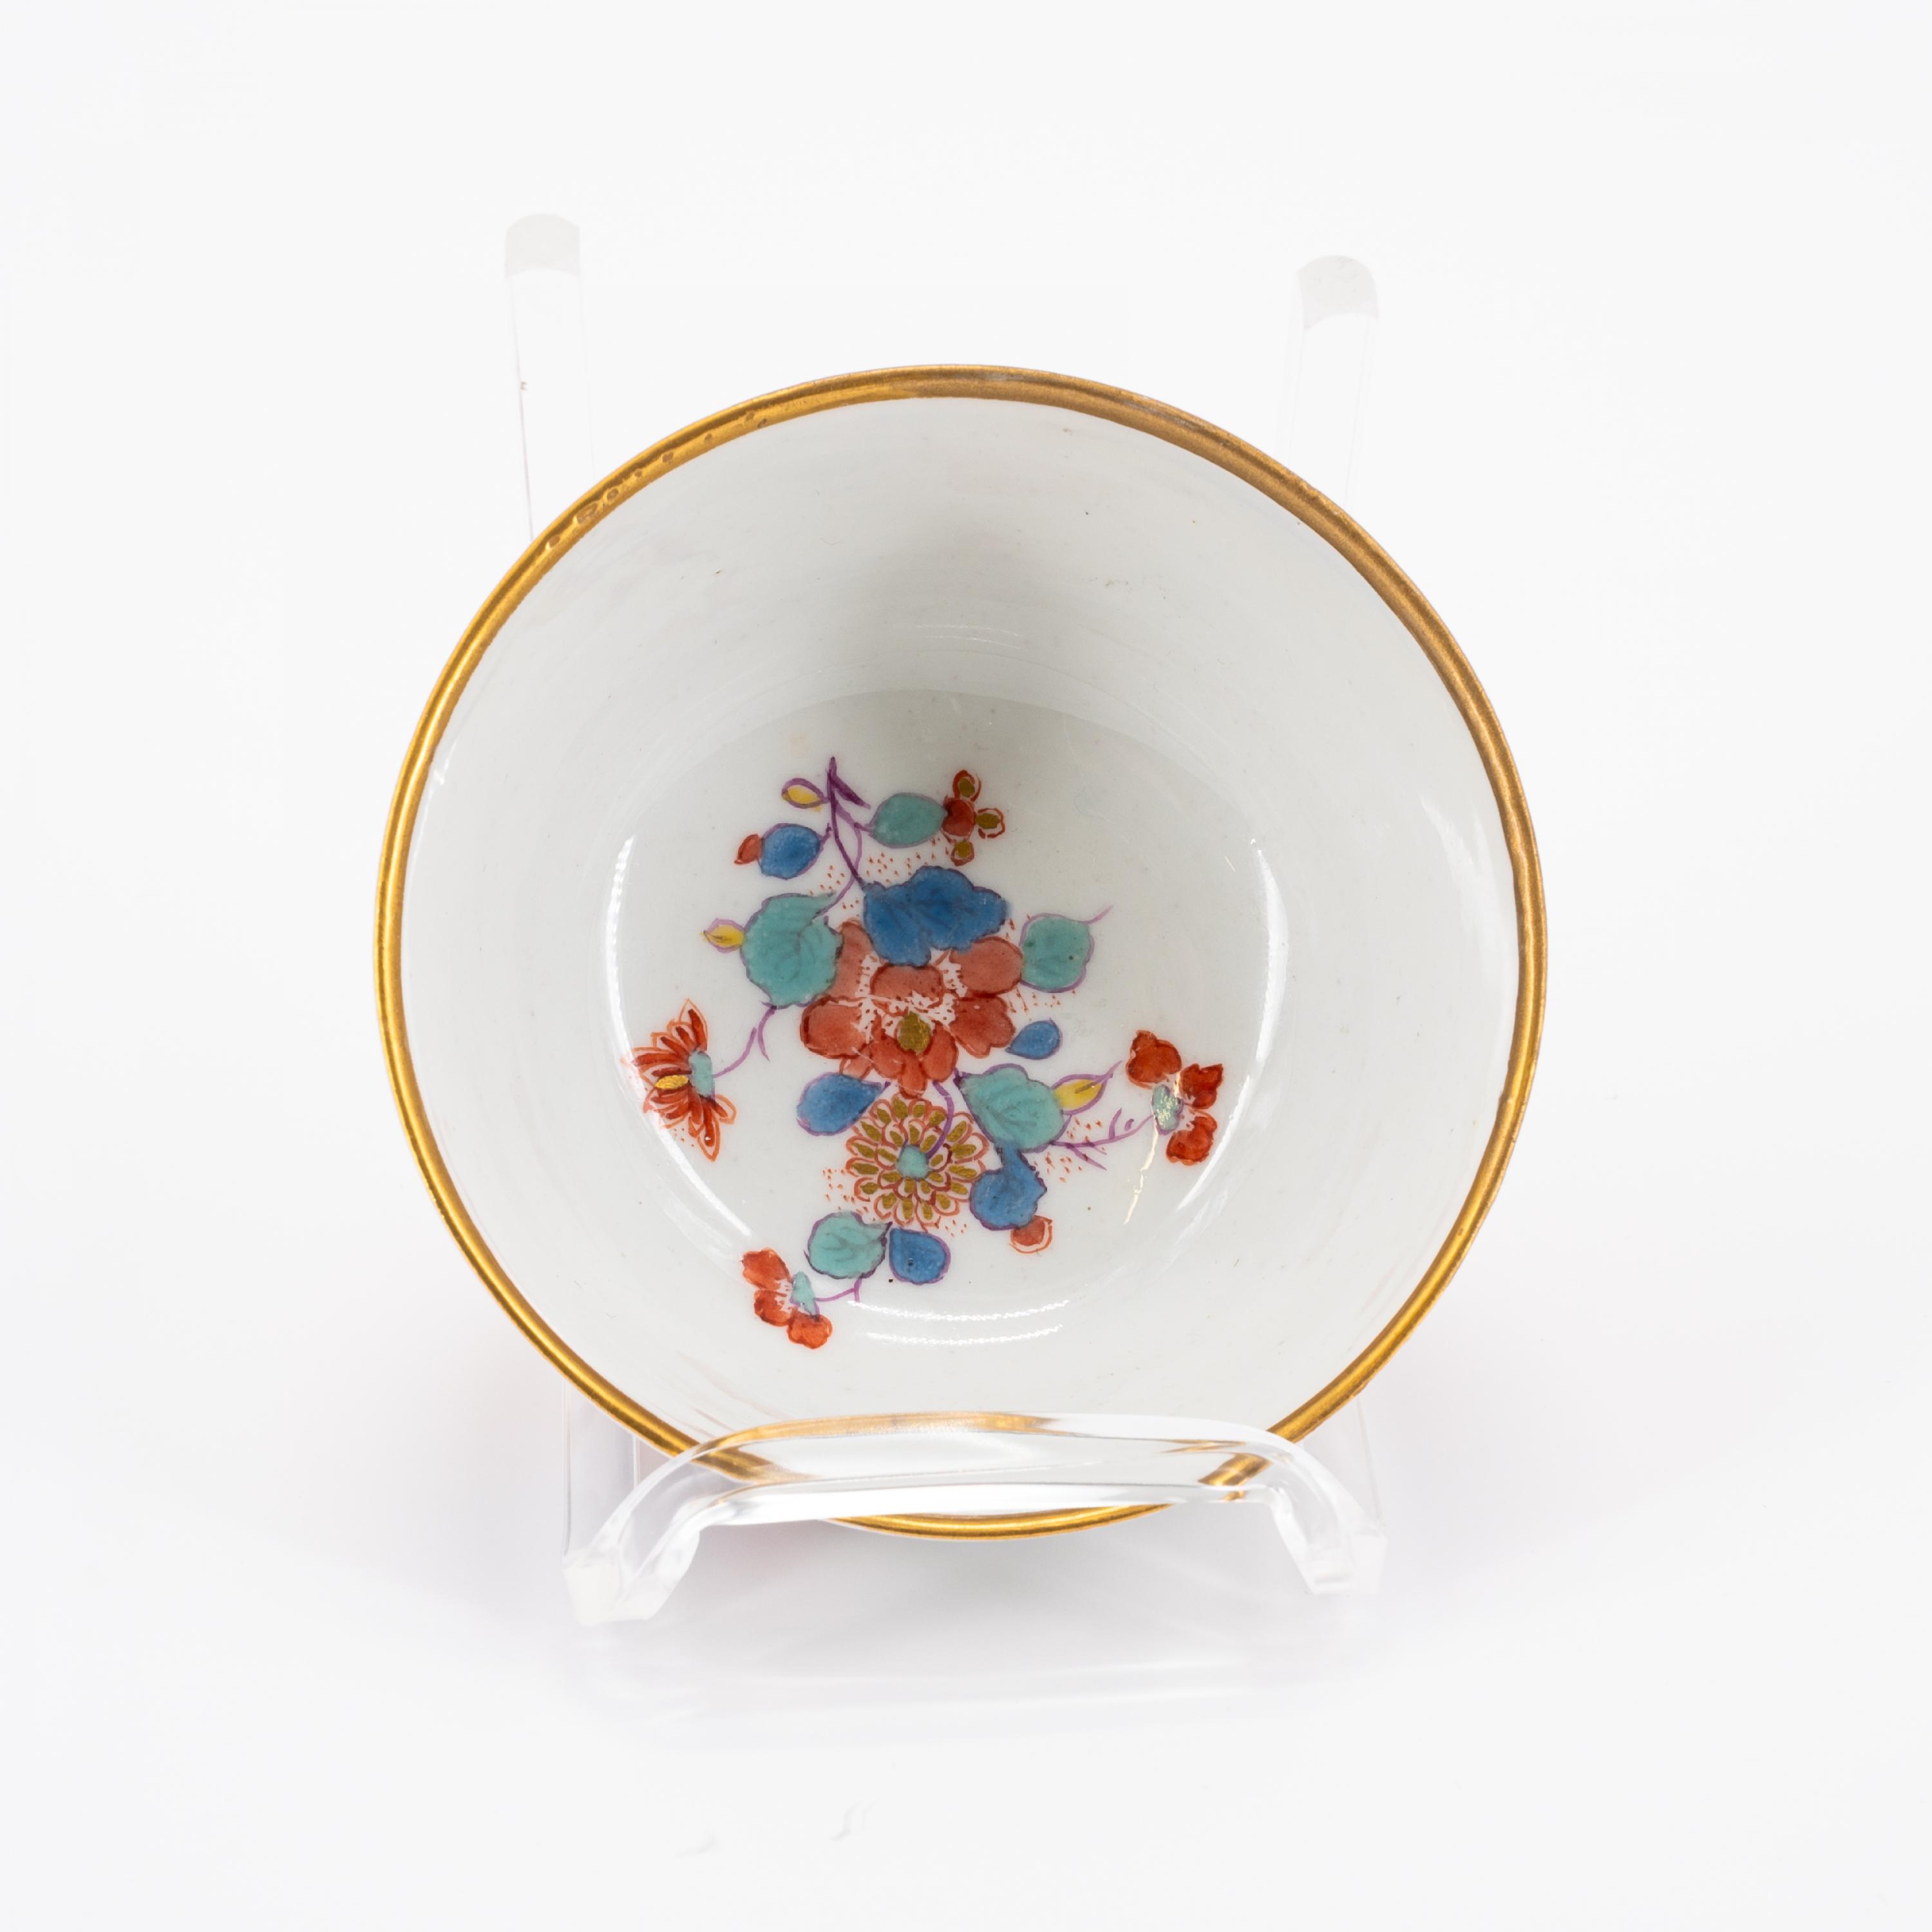 PORCELAIN TEA BOWL WITH CHINOISERIES - Image 4 of 5